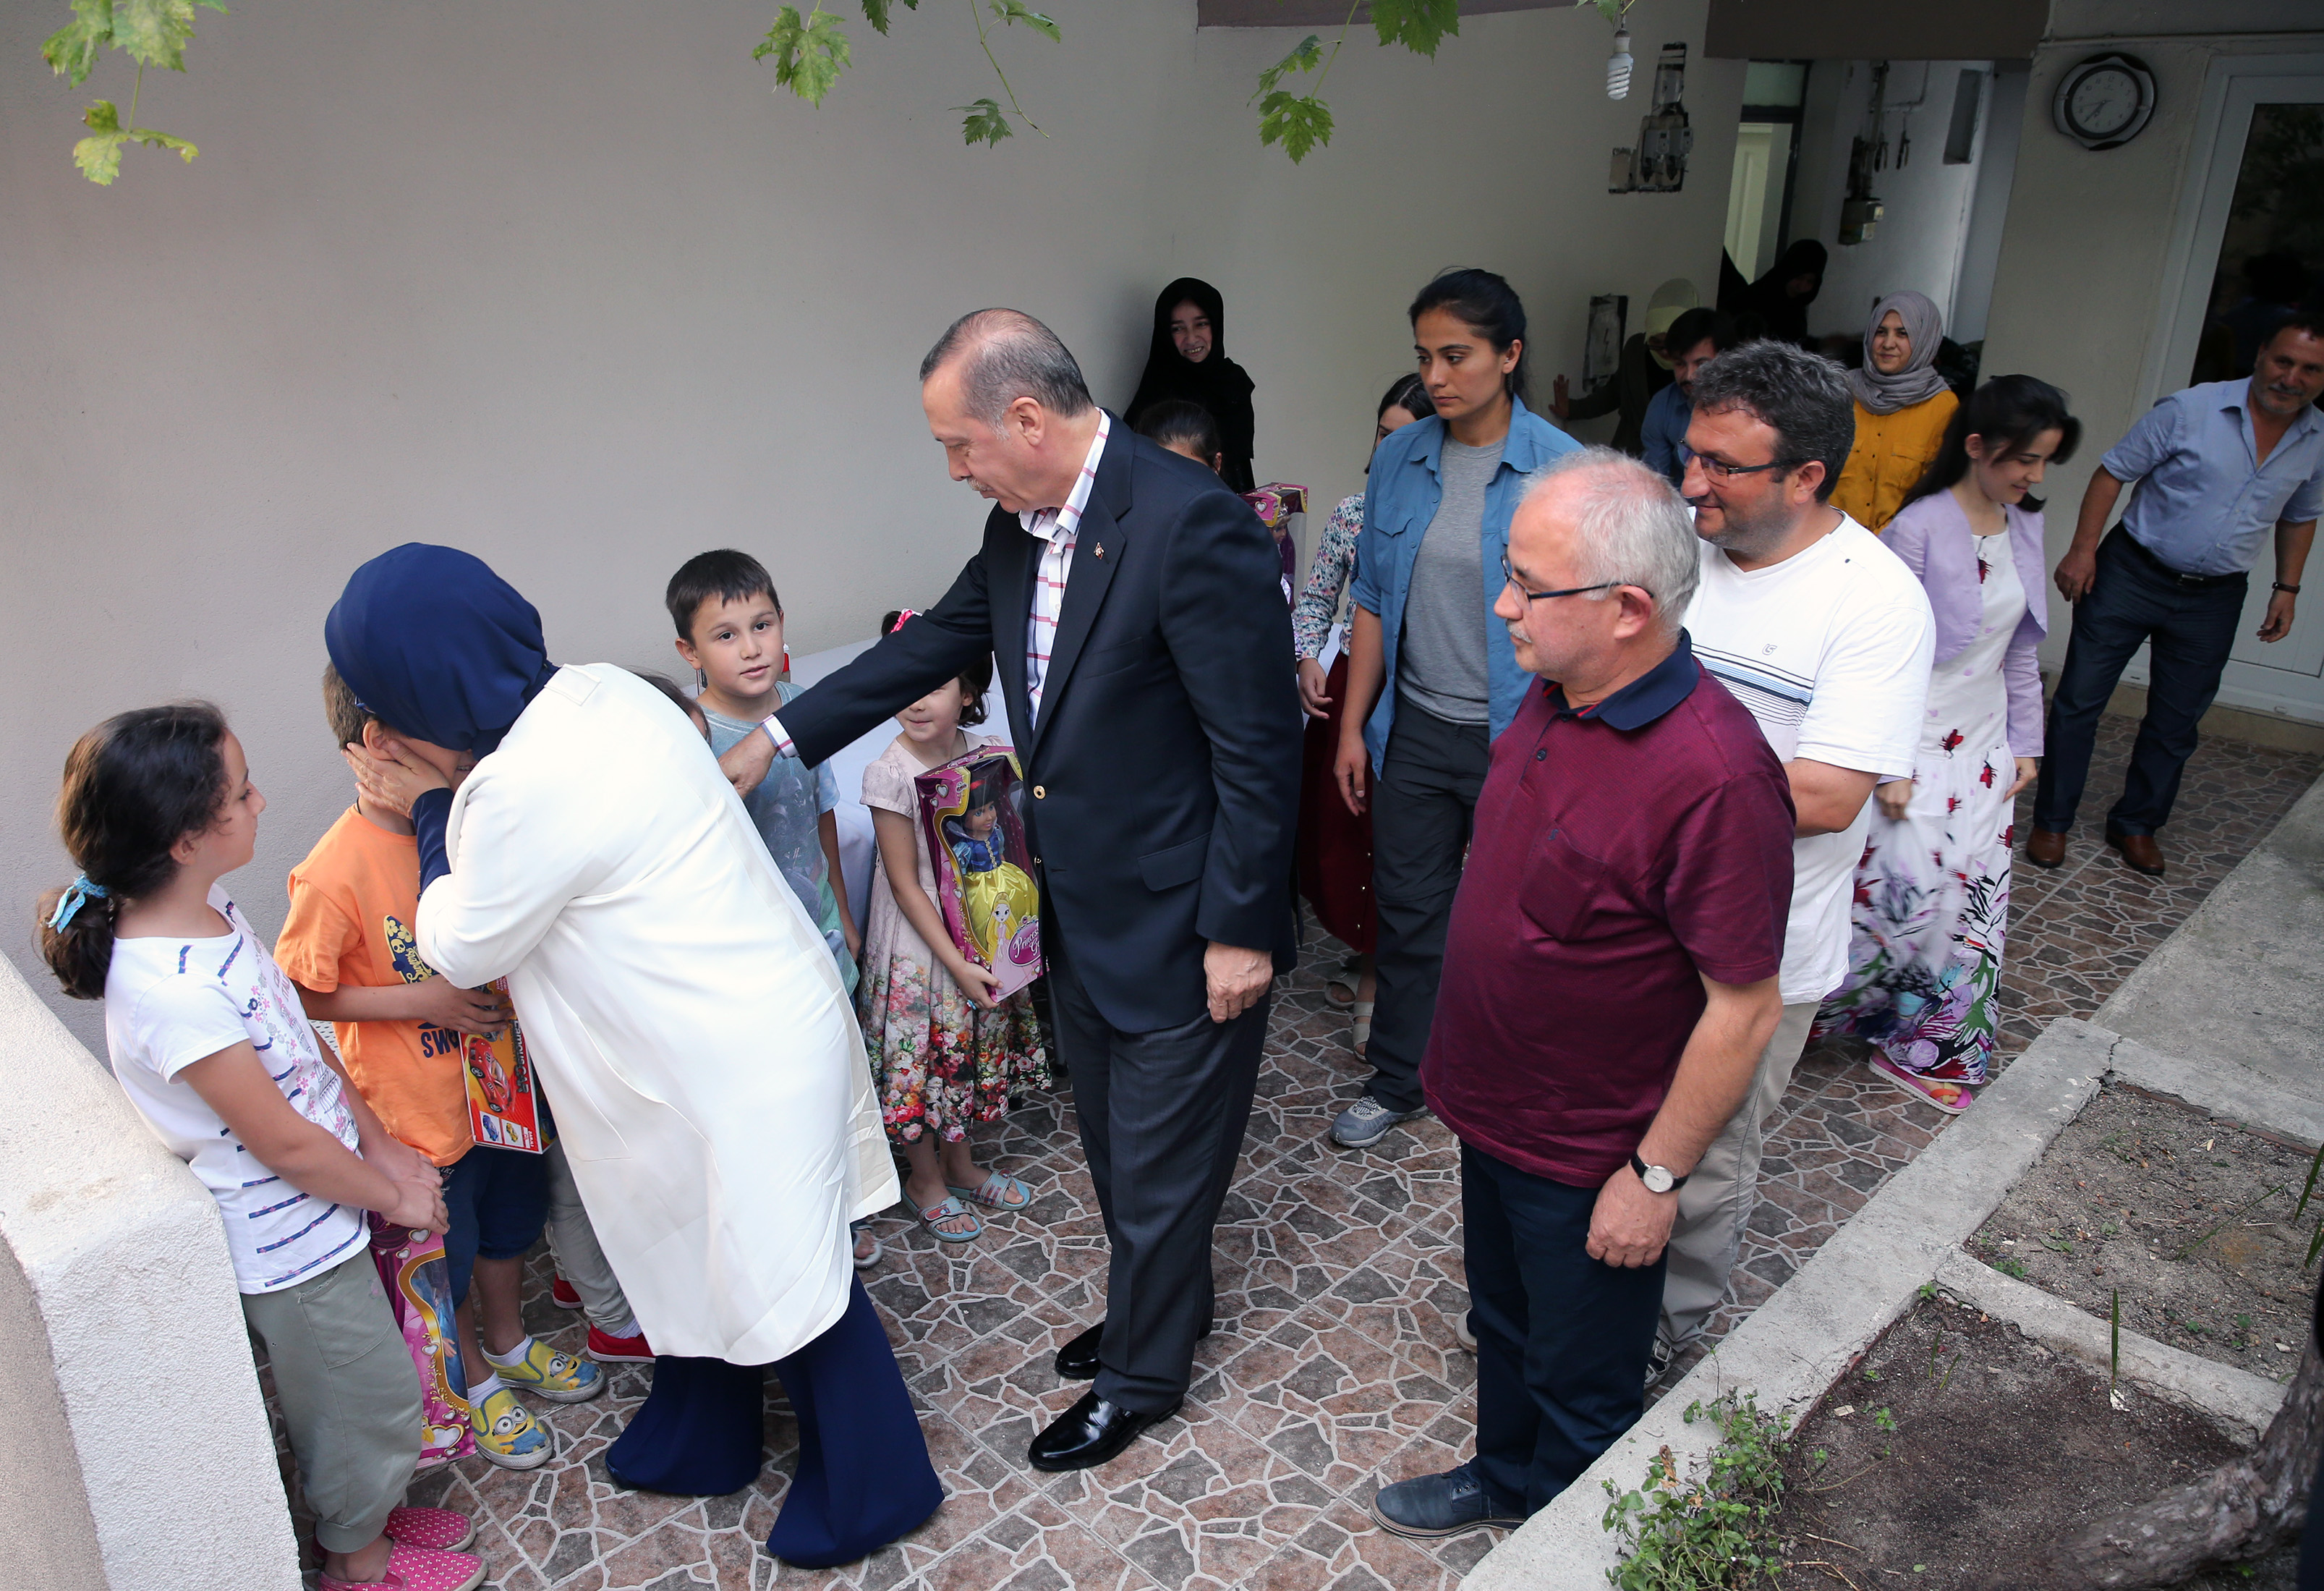 President Recep Tayyip Erdoğan and his wife Emine visited the family of Salih Alışkan, who was martyred on the Boshorus bridge during the July 15 coup attempt.